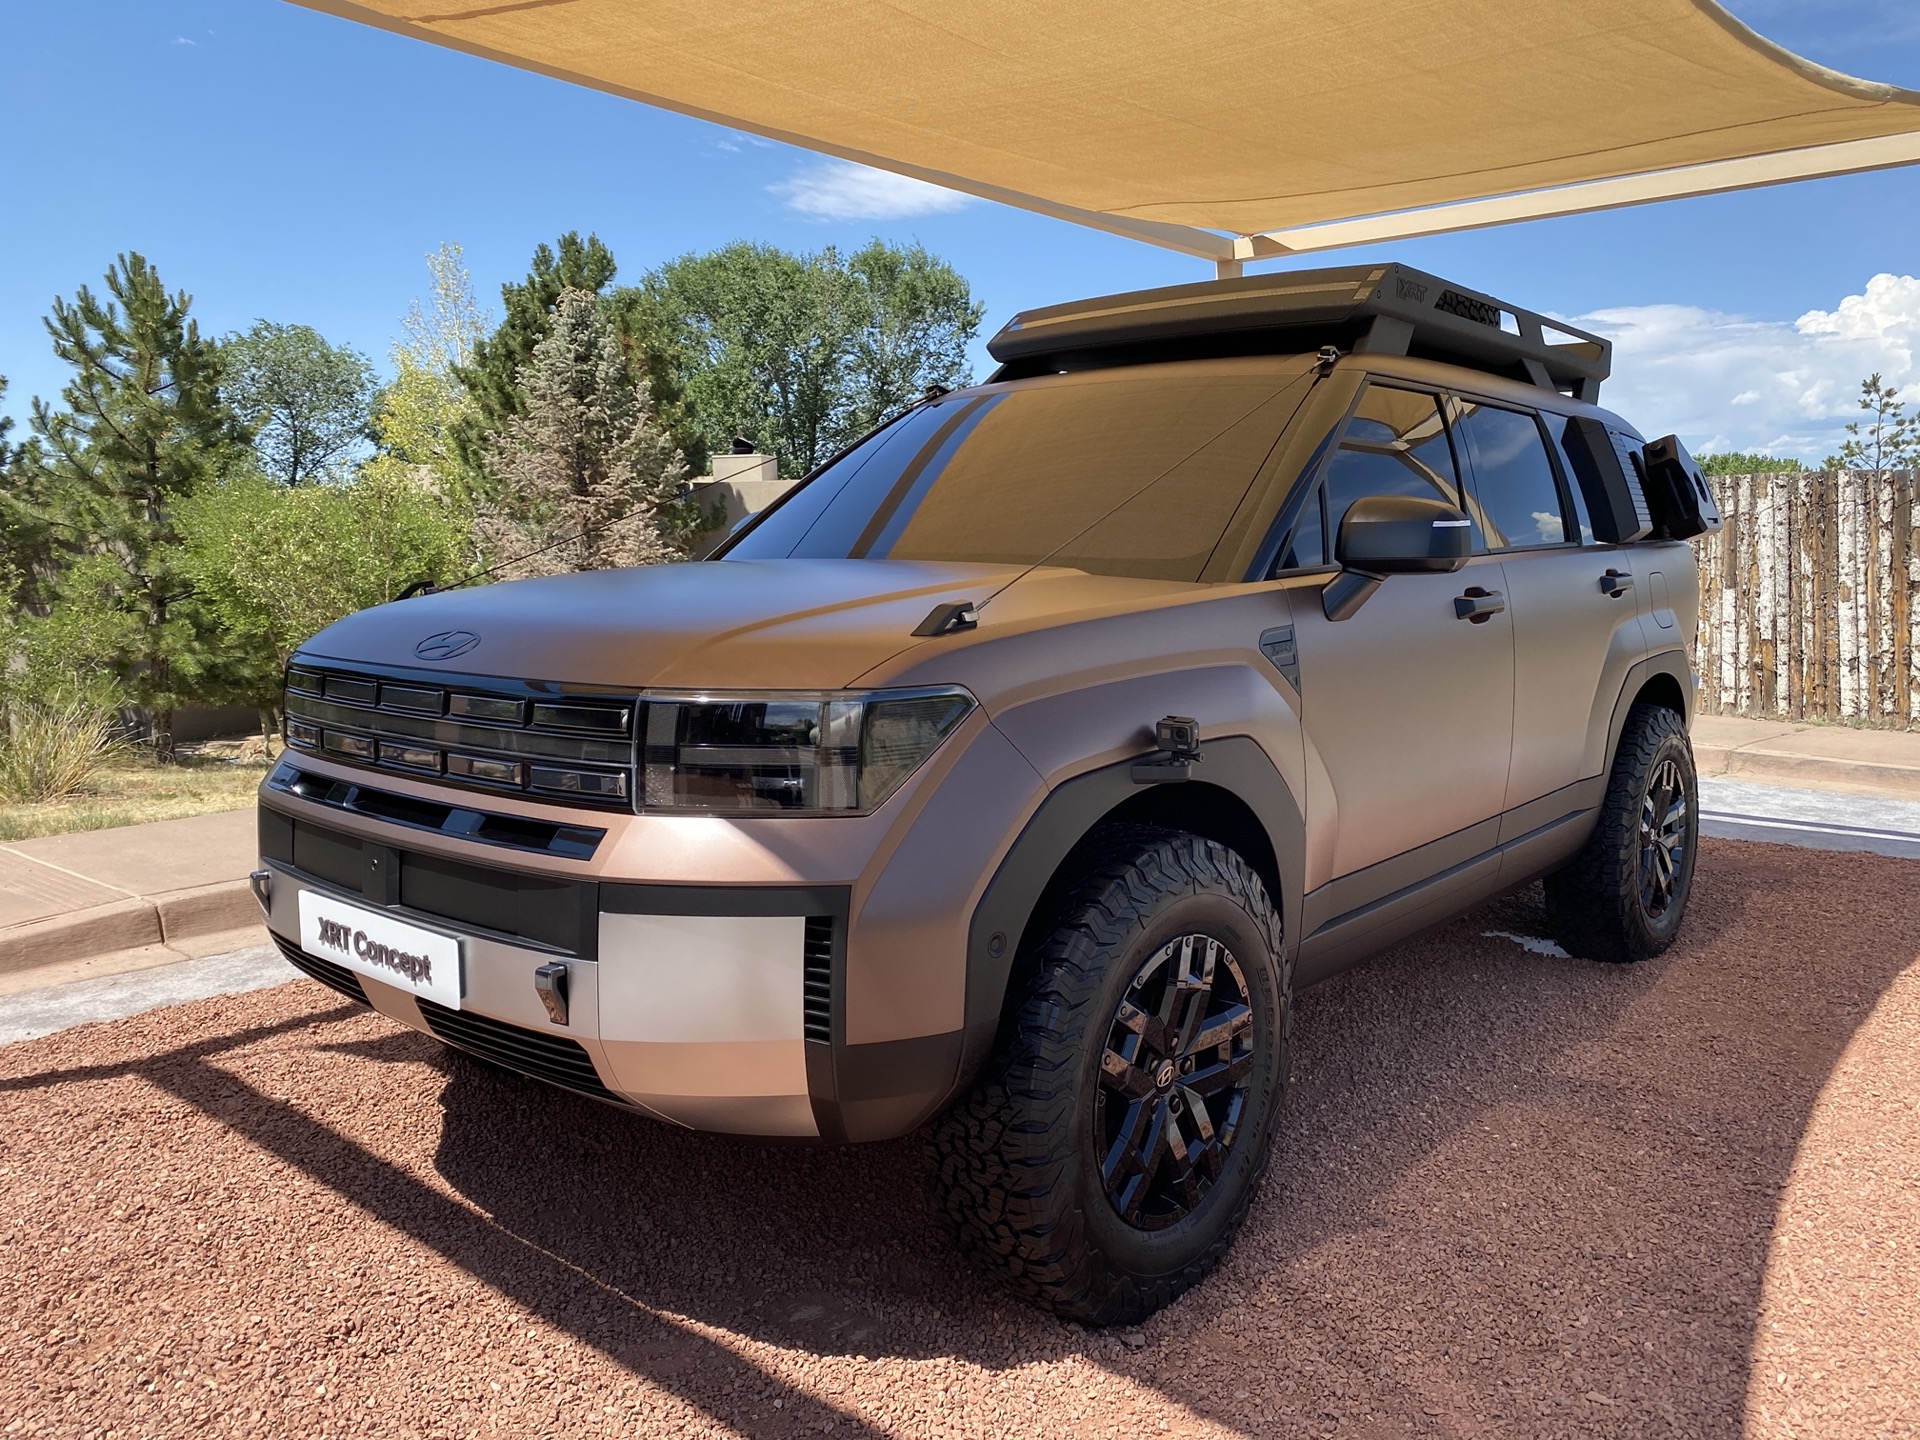 Ford Bronco Radical, Unexpected, Bronco, Land Rover & Land Cruiser Fighter, 2024 Santa Fe webp-optimize-high-quality-70-width-1440-dpr-1-